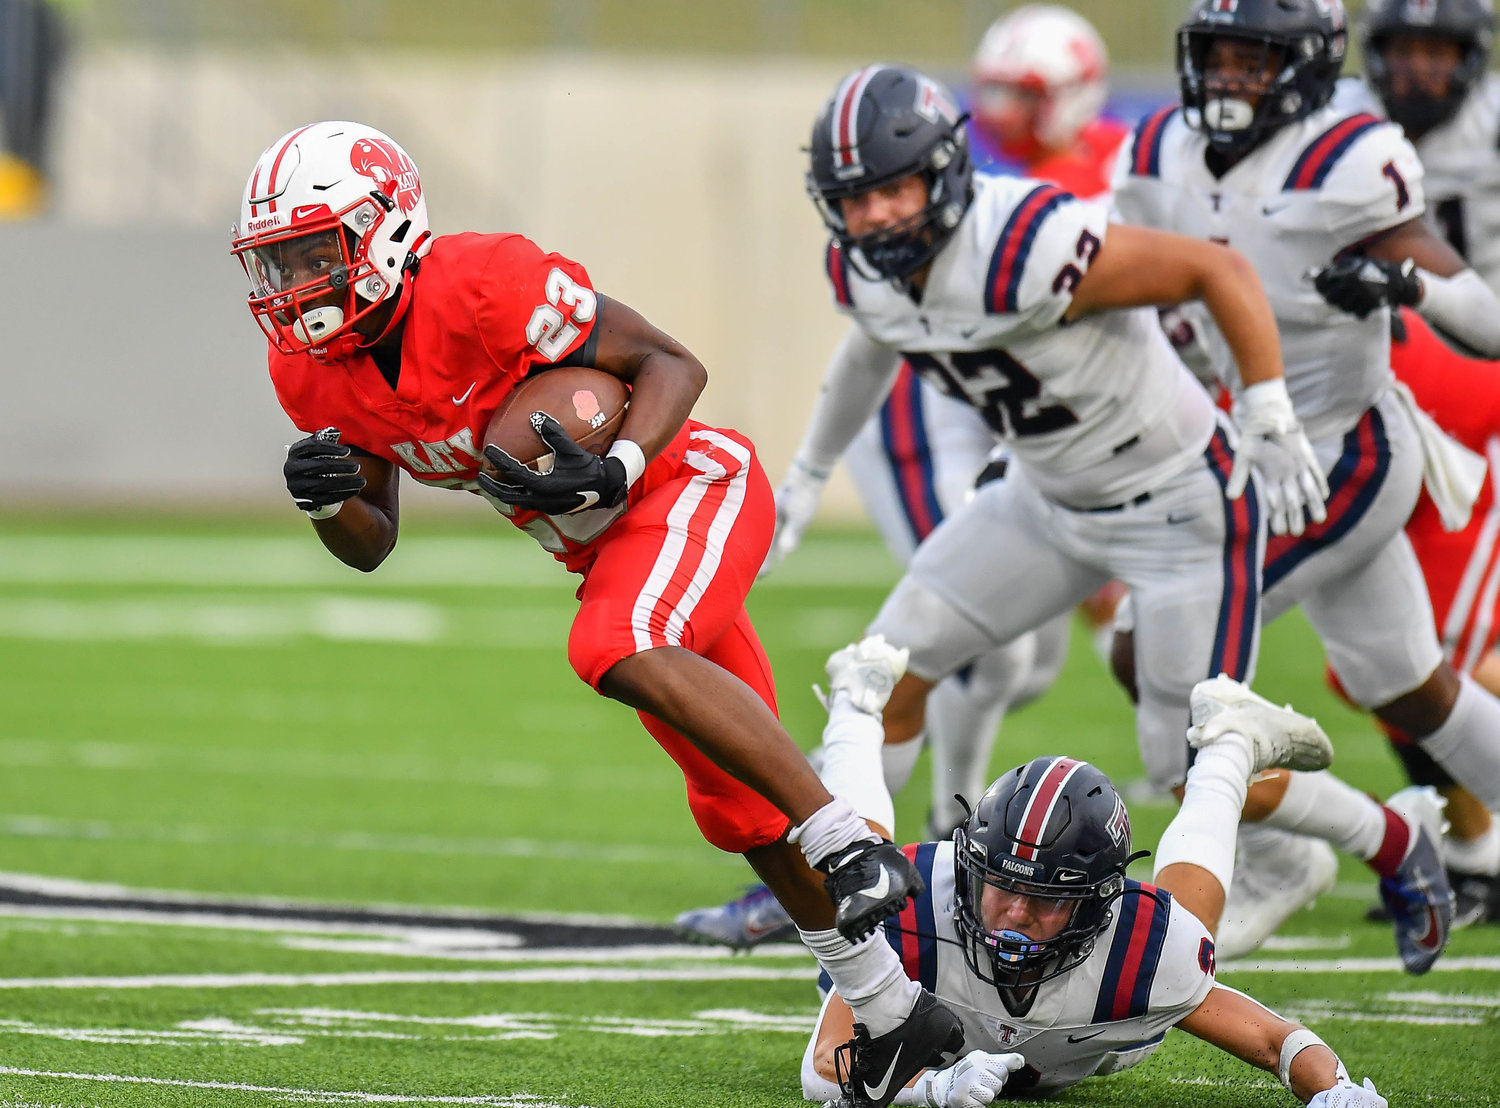 Katy, Tx. Oct 1, 2021: Katy's #23 Seth Davis carries the ball breaking tackles at mid field for a TD during a game between Katy Tigers and Tompkins Falcons at Legacy Stadium in Katy. (Photo by Mark Goodman / Katy Times)